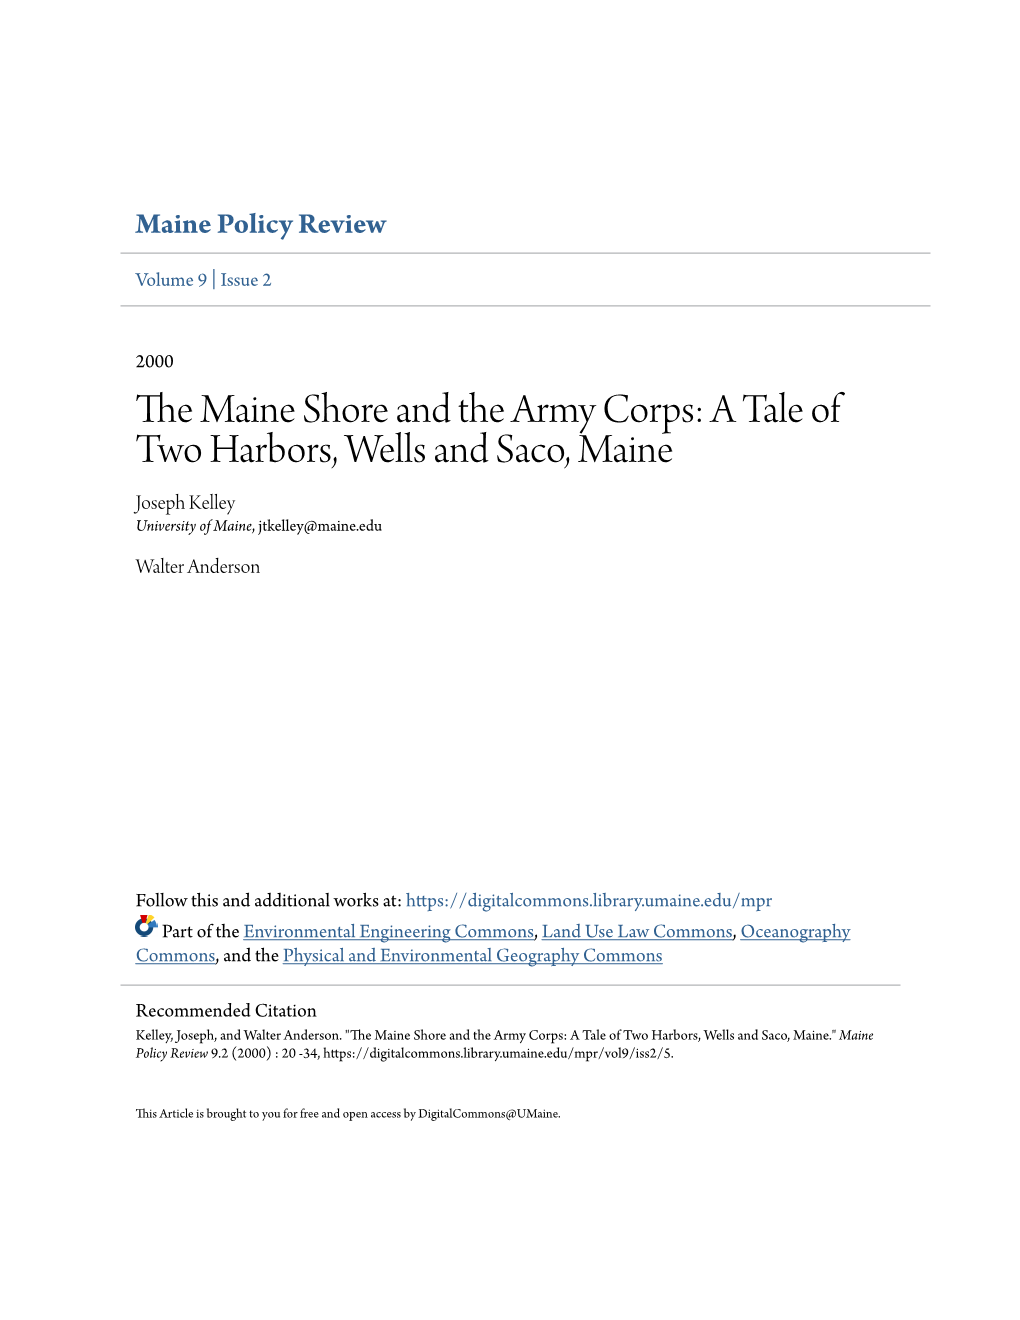 The Maine Shore and the Army Corps: a Tale of Two Harbors, Wells and Saco, Maine